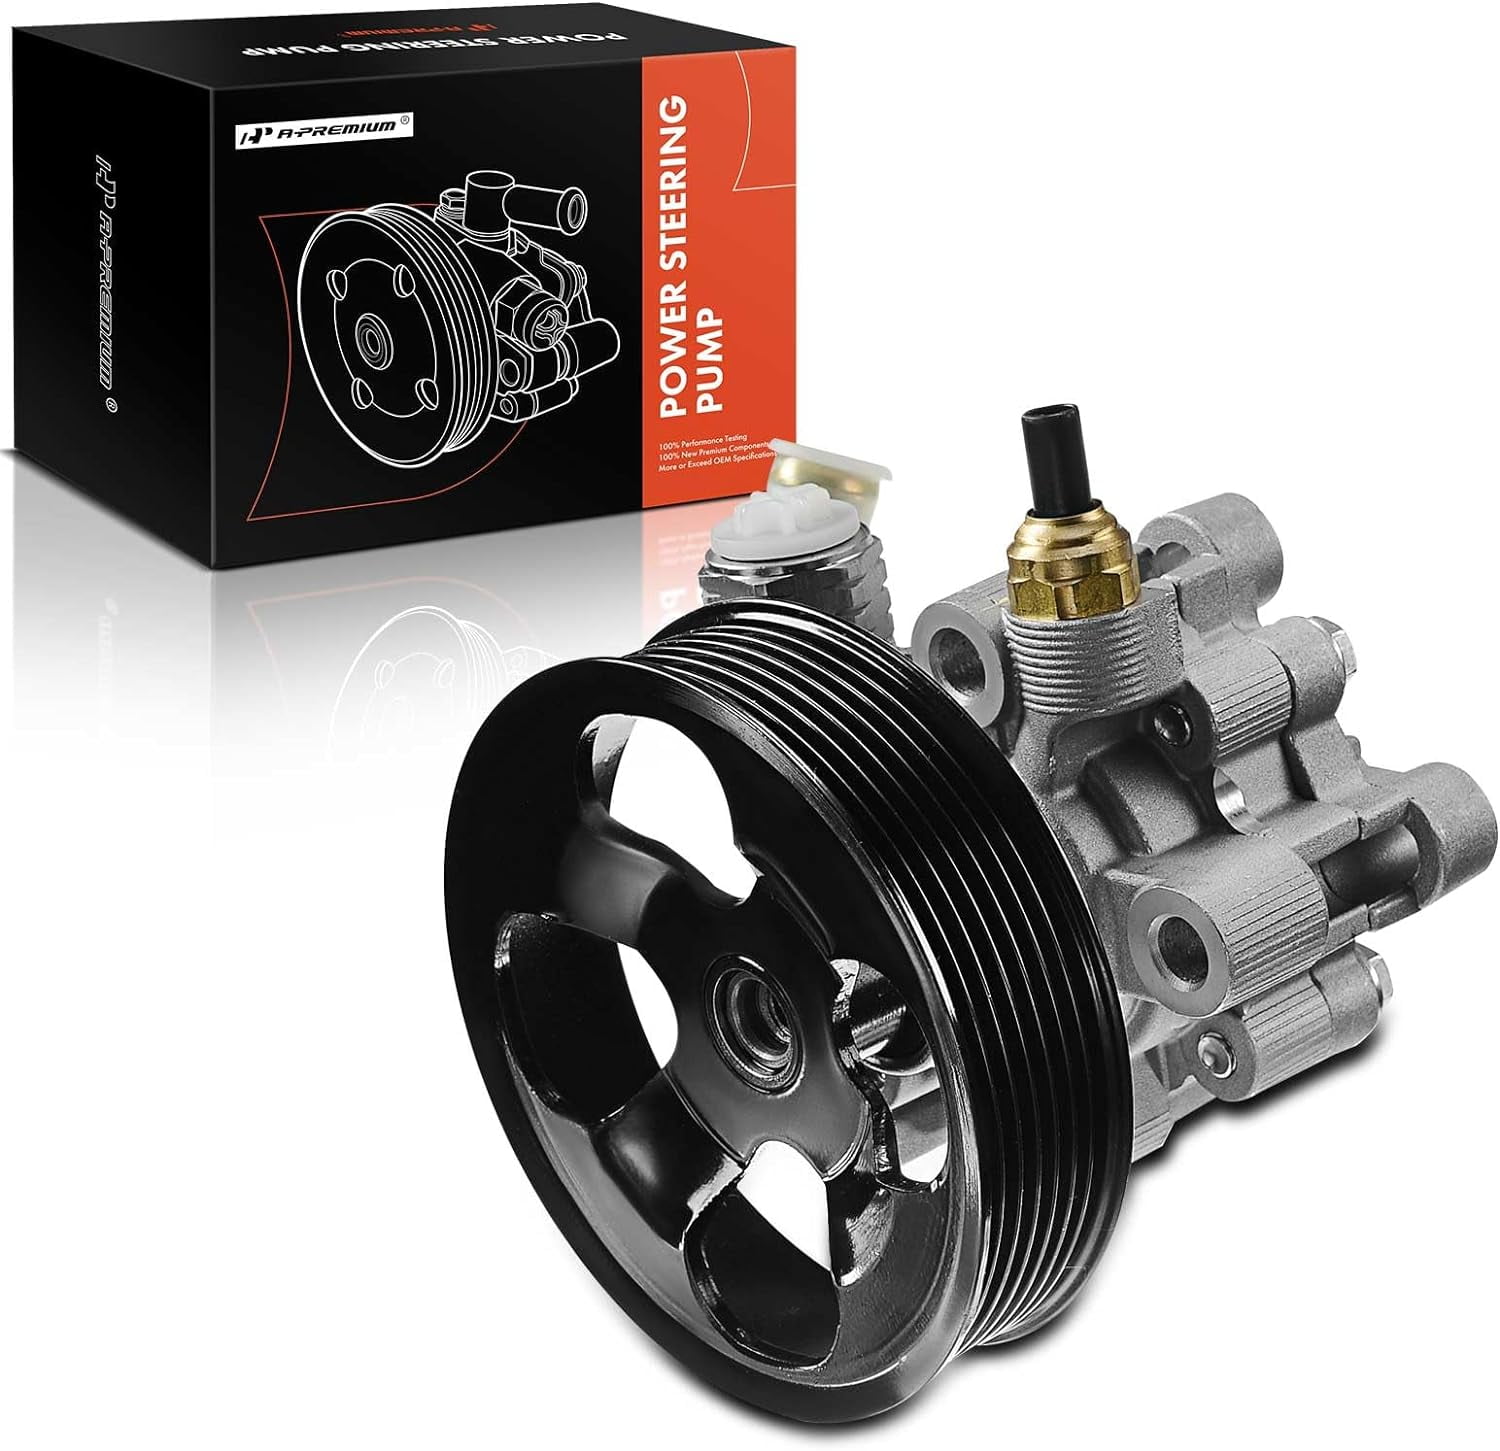 A-Premium Power Steering Pump with Pulley Replacement for Toyota